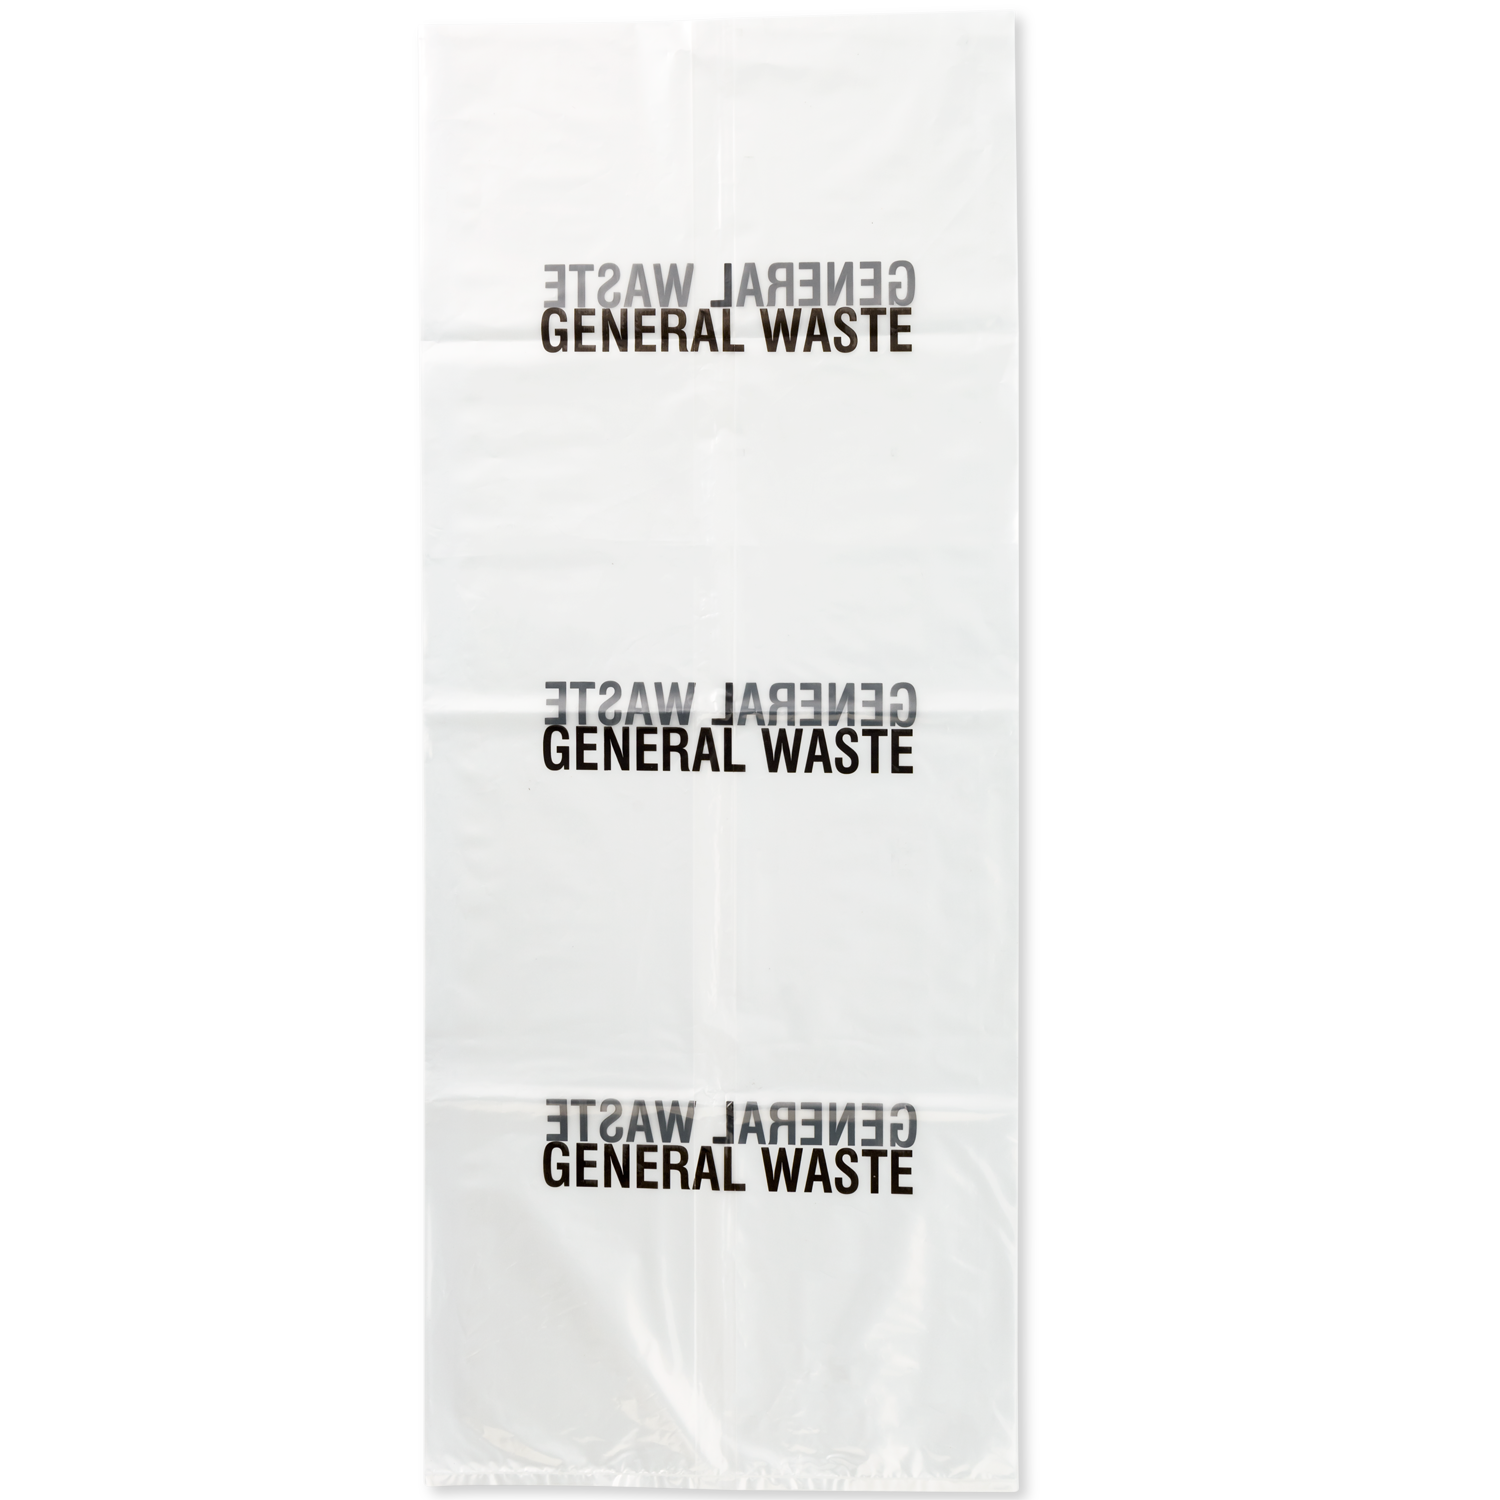 CLEAR LOW DENSITY GUSETTED POLY BAGS PRINTED GENERAL WASTE